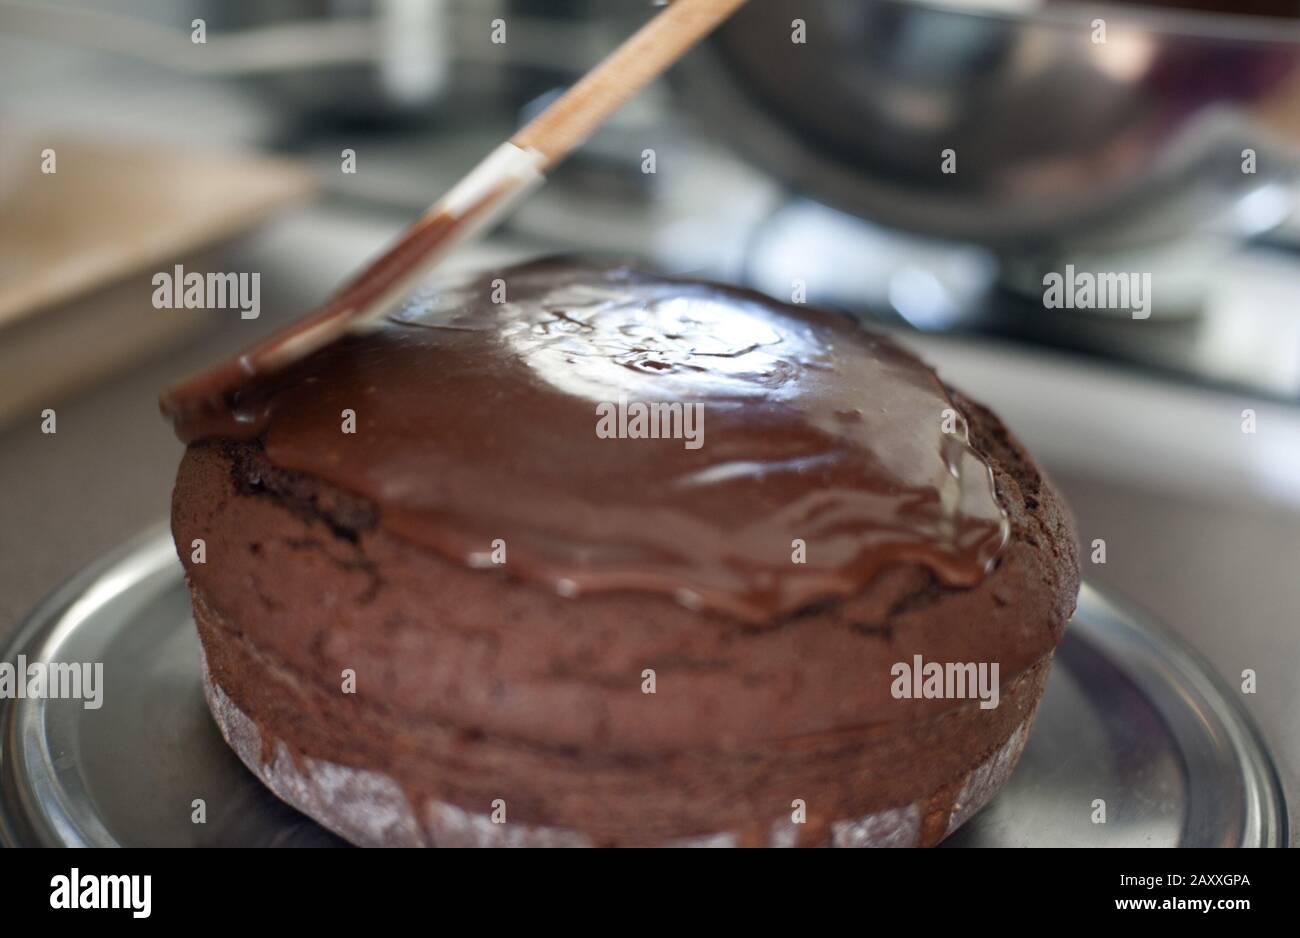 Cook spreading chocolate icing onto a freshly baked cake in a kitchen with a wooden spatula Stock Photo